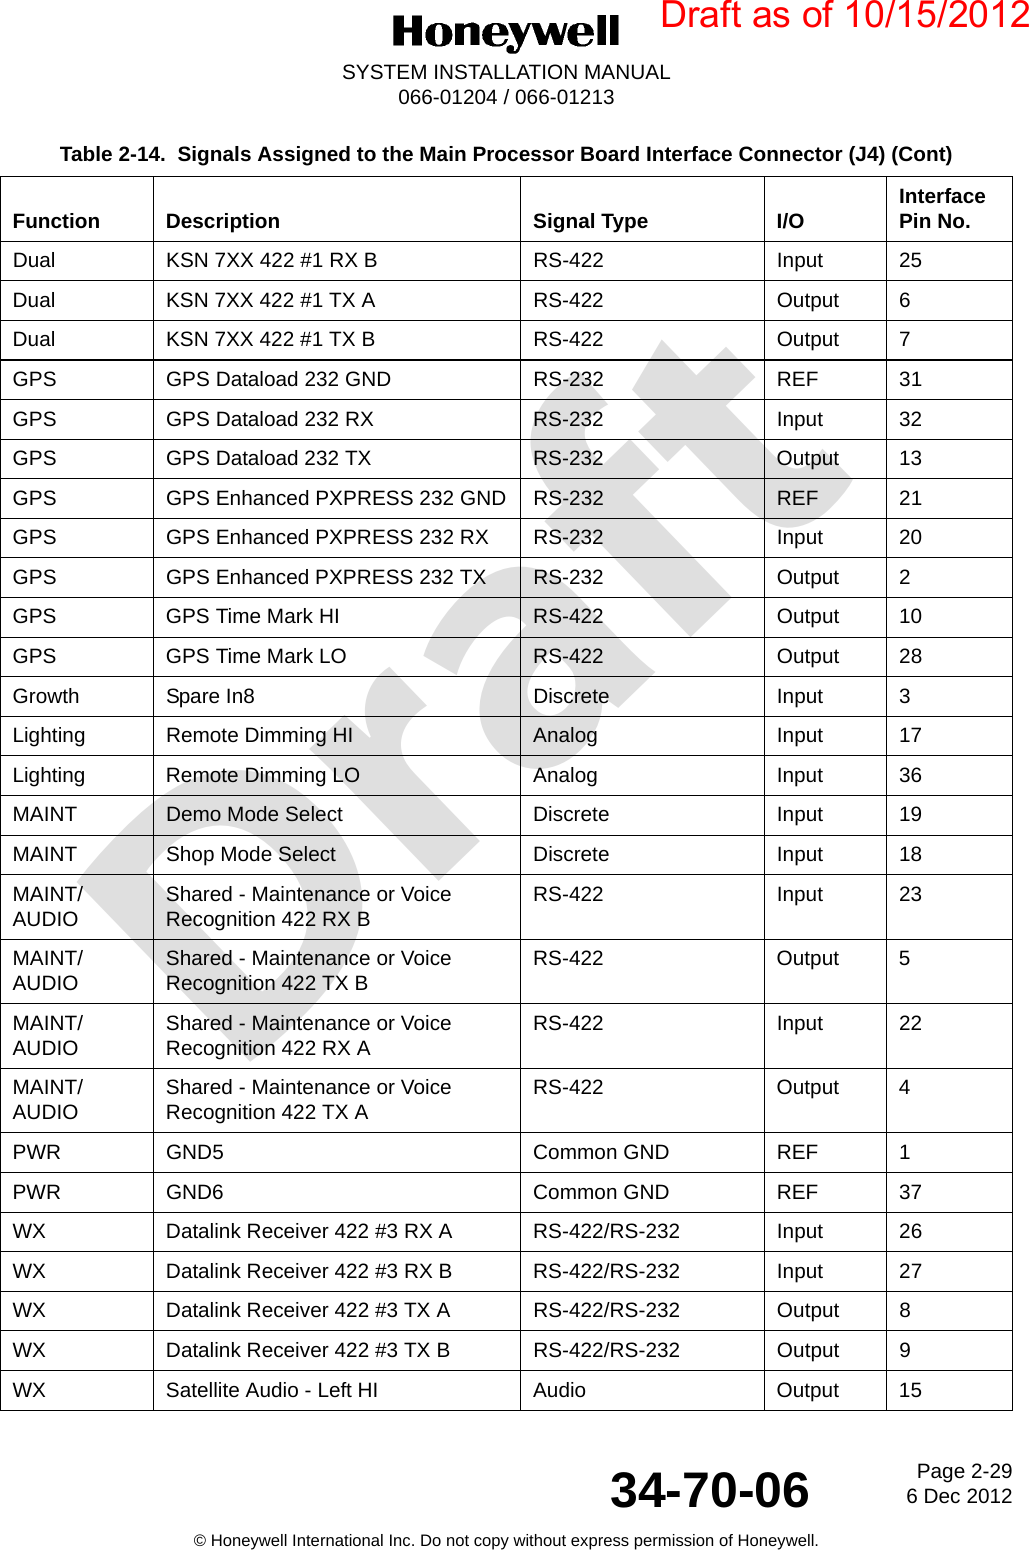 DraftPage 2-296 Dec 201234-70-06SYSTEM INSTALLATION MANUAL066-01204 / 066-01213© Honeywell International Inc. Do not copy without express permission of Honeywell.Dual KSN 7XX 422 #1 RX B RS-422 Input 25Dual KSN 7XX 422 #1 TX A RS-422 Output 6Dual KSN 7XX 422 #1 TX B RS-422 Output 7GPS GPS Dataload 232 GND RS-232 REF 31GPS GPS Dataload 232 RX RS-232 Input 32GPS GPS Dataload 232 TX RS-232 Output 13GPS GPS Enhanced PXPRESS 232 GND RS-232 REF 21GPS GPS Enhanced PXPRESS 232 RX RS-232 Input 20GPS GPS Enhanced PXPRESS 232 TX RS-232 Output 2GPS GPS Time Mark HI RS-422 Output 10GPS GPS Time Mark LO RS-422 Output 28Growth Spare In8 Discrete Input 3Lighting Remote Dimming HI Analog Input 17Lighting Remote Dimming LO Analog Input 36MAINT Demo Mode Select Discrete Input 19MAINT Shop Mode Select Discrete Input 18MAINT/ AUDIO Shared - Maintenance or Voice Recognition 422 RX B RS-422 Input 23MAINT/ AUDIO Shared - Maintenance or Voice Recognition 422 TX B RS-422 Output 5MAINT/ AUDIO Shared - Maintenance or Voice Recognition 422 RX A RS-422 Input 22MAINT/ AUDIO Shared - Maintenance or Voice Recognition 422 TX A RS-422 Output 4PWR GND5 Common GND REF 1PWR GND6 Common GND REF 37WX Datalink Receiver 422 #3 RX A RS-422/RS-232 Input 26WX Datalink Receiver 422 #3 RX B RS-422/RS-232 Input 27WX Datalink Receiver 422 #3 TX A RS-422/RS-232 Output 8WX Datalink Receiver 422 #3 TX B RS-422/RS-232 Output 9WX Satellite Audio - Left HI Audio Output 15Table 2-14.  Signals Assigned to the Main Processor Board Interface Connector (J4) (Cont)Function Description Signal Type I/O Interface Pin No.Draft as of 10/15/2012